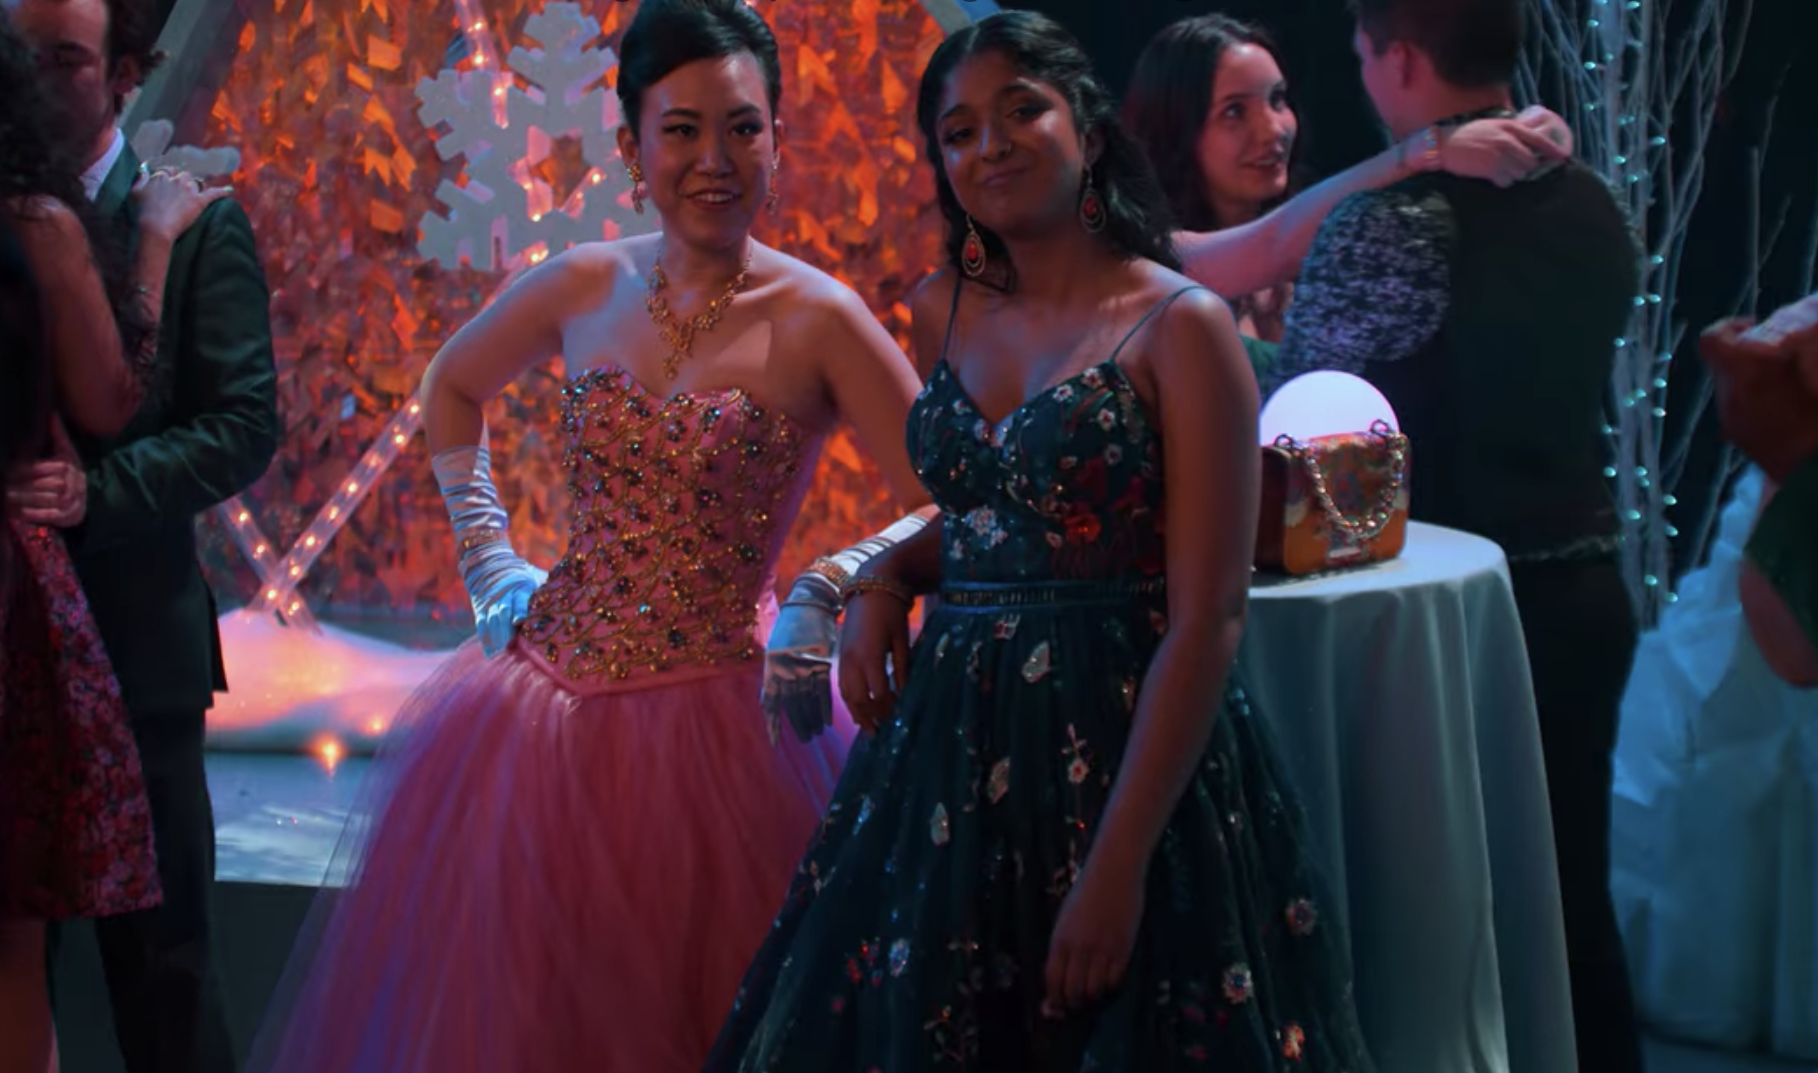 Eleanor and Devi are standing dressed in formal gowns at their school dance